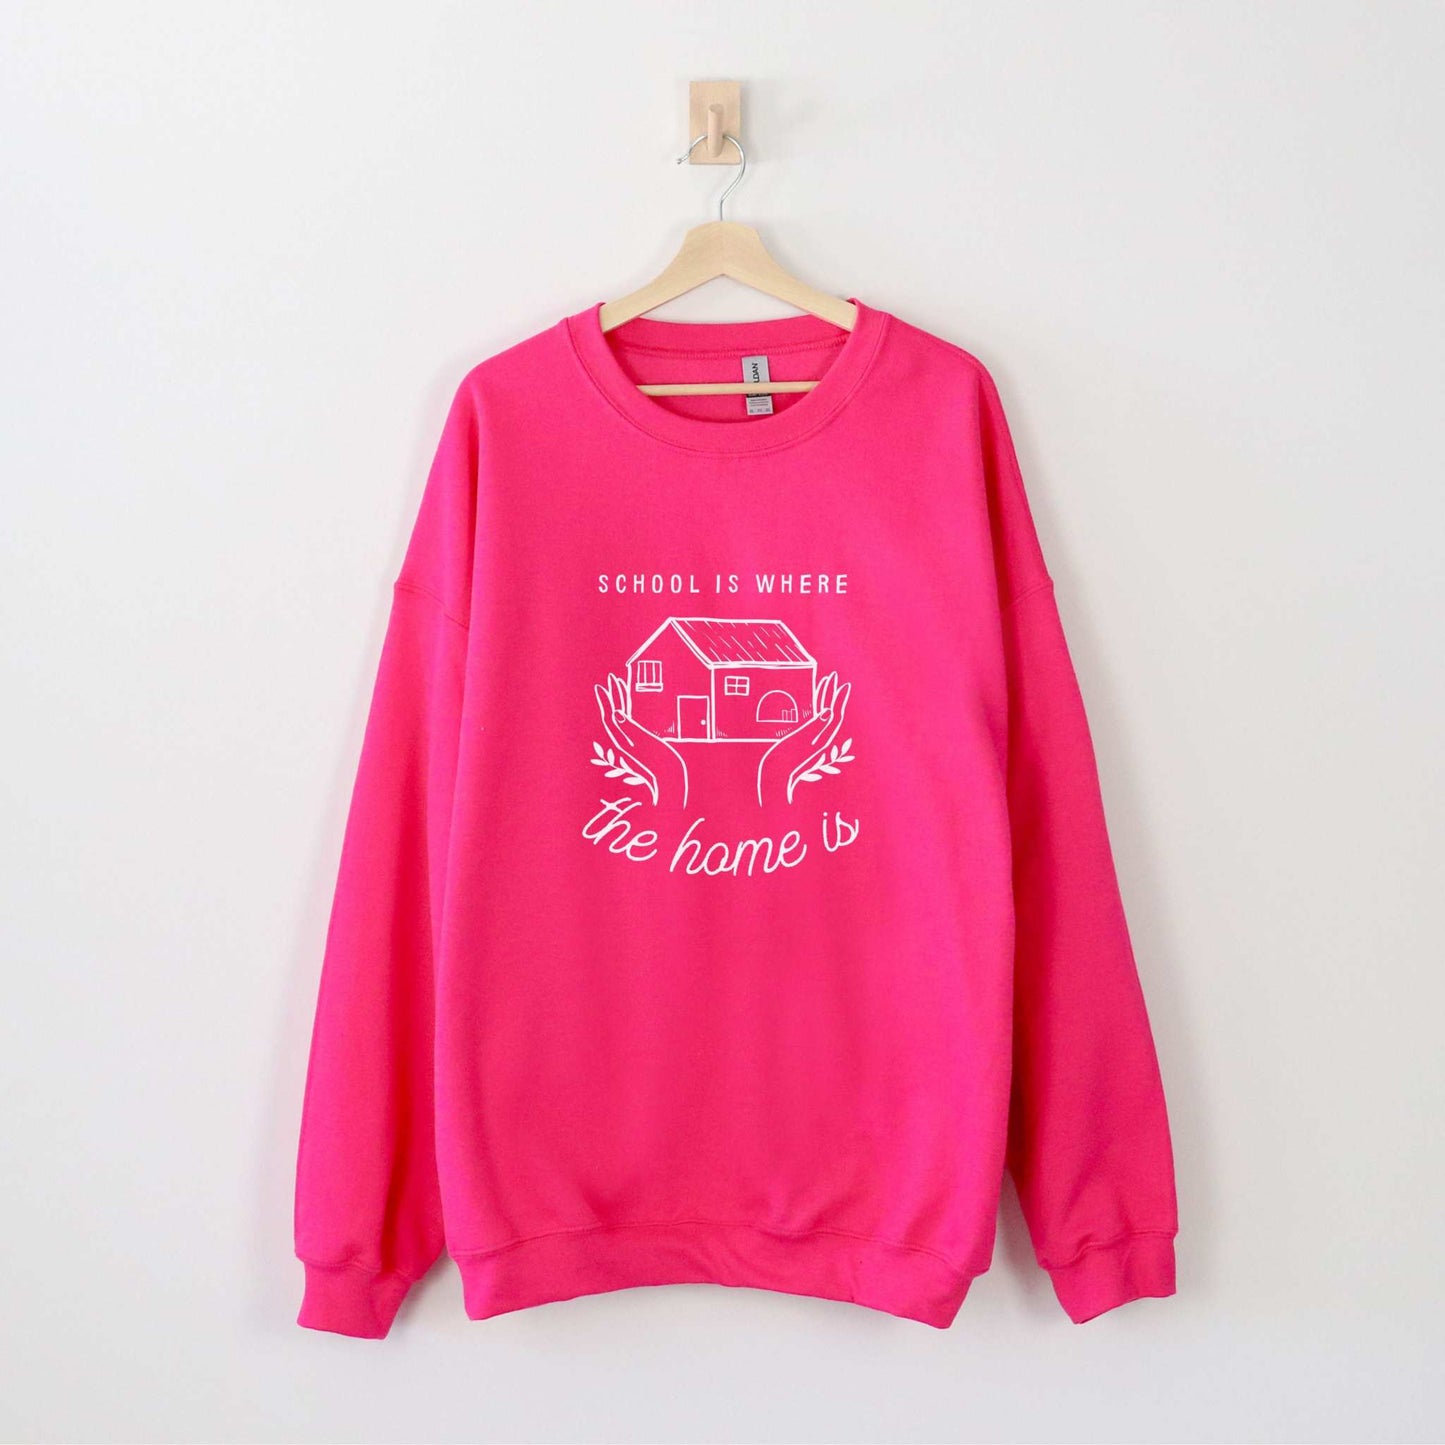 Womens Crewneck Sweatshirt Wolfe Paw Designs Womens Crewneck SweatshirtCozy up while homeschooling your children in our School Is Where The Home Is  sweater.🤍Available in hoodie and tshirt50% cotton, 50% polyesterMedium-heavy fabricLSchool Is Where The Home Is  Womens Crewneck Sweatshirt